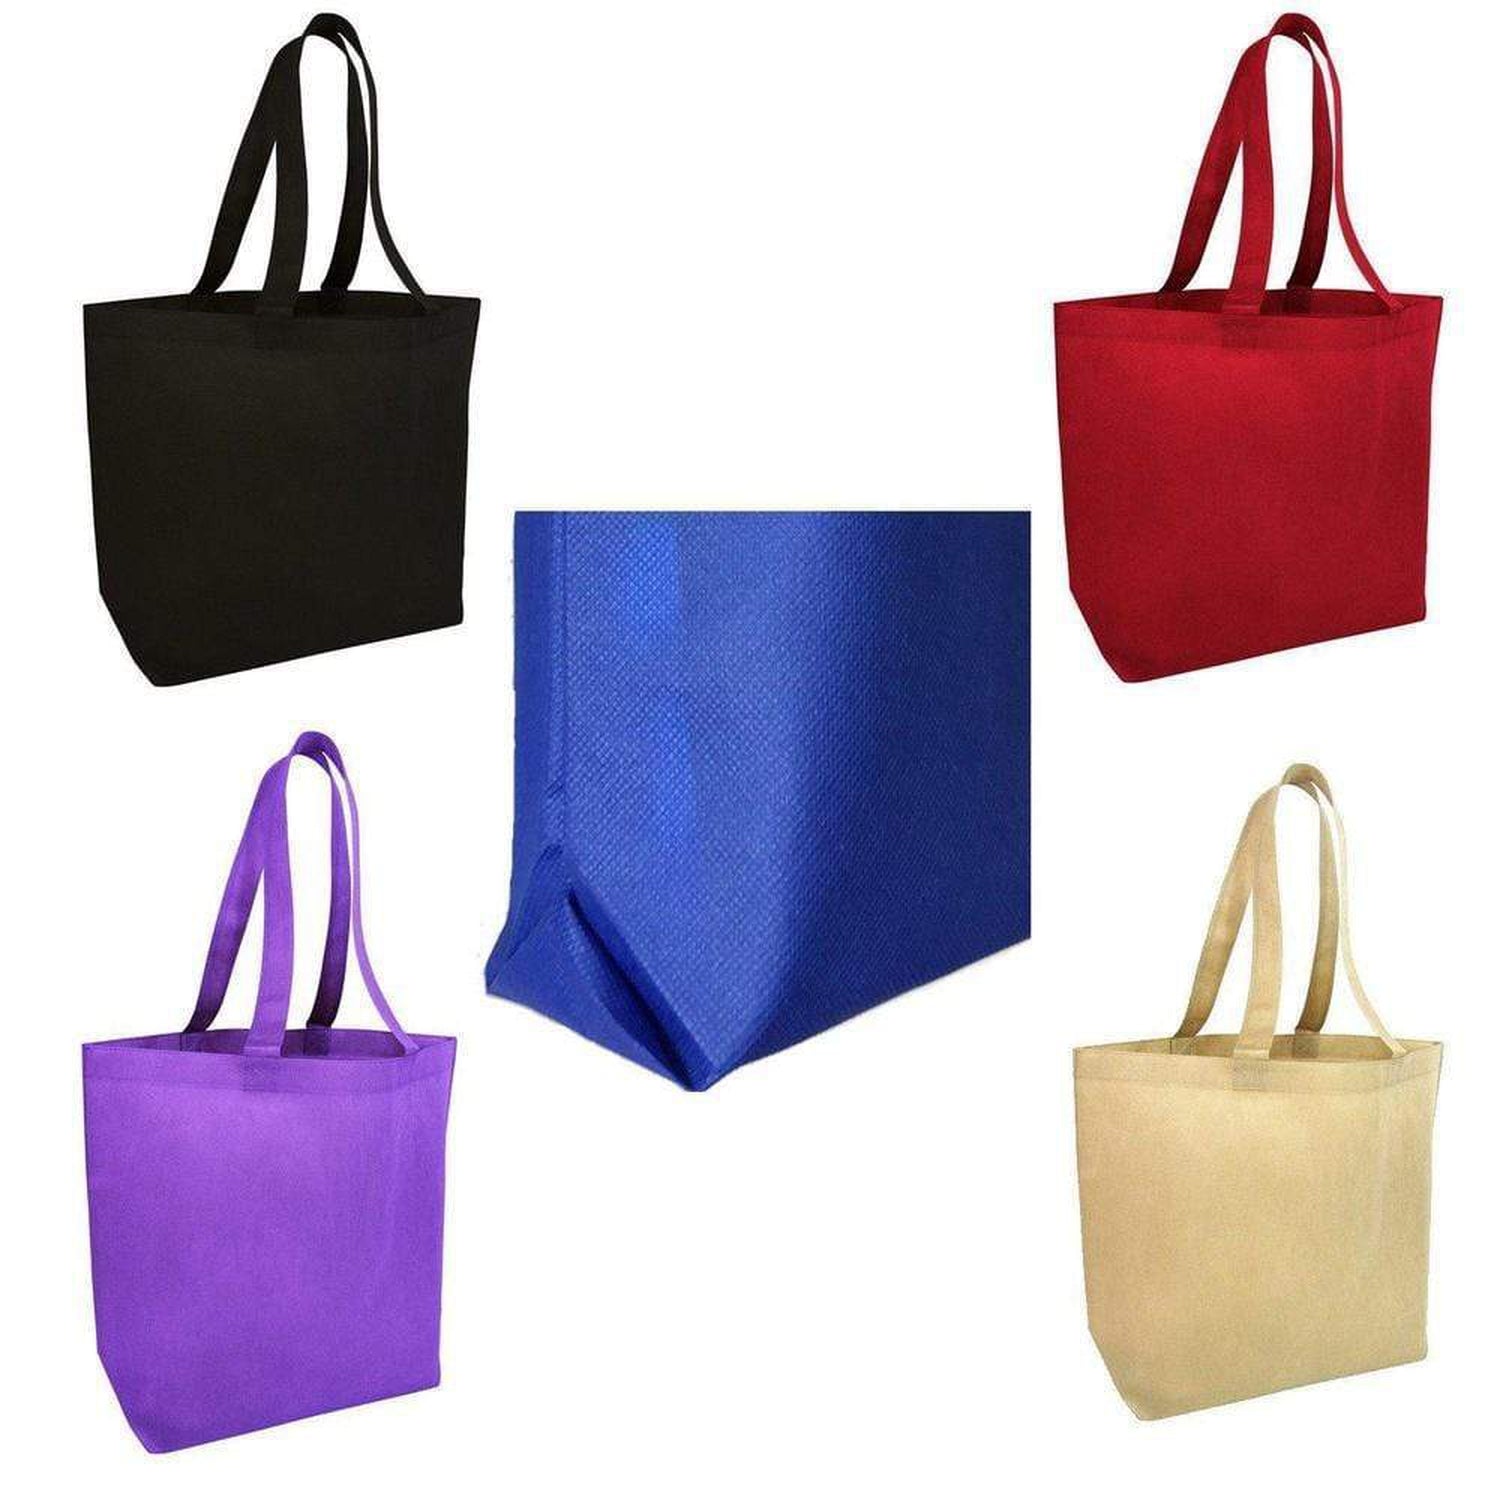 Promotional Non-Woven Large Size Tote Bags with Bottom Gusset - Single Bags